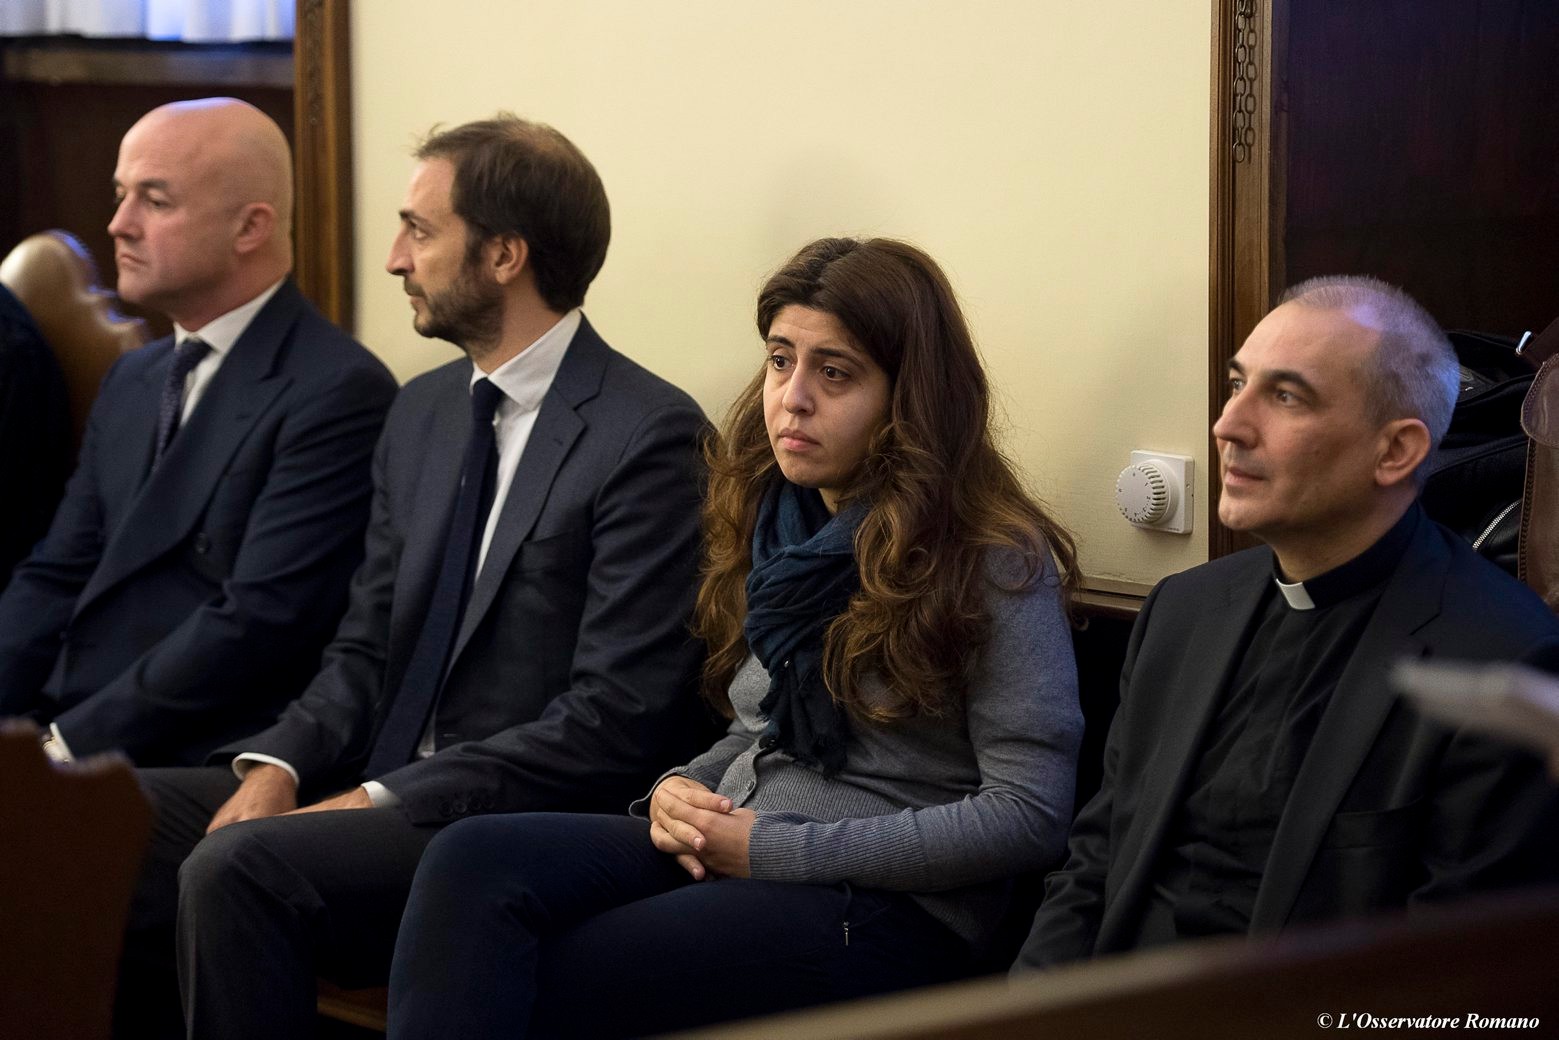 From left, Italian journalists Gianluigi Nuzzi and Emiliano Fittipaldi, public relations expert Francesca Chaouqui and Monsignor Angelo Lucio Vallejo Balda sit during their trial inside the Vatican, Tuesday, Nov. 24, 2015. Two Italian journalists who wrote books detailing Vatican mismanagement faced trial Tuesday in a Vatican courtroom along with three people accused of leaking them the information, in a case that has drawn scorn from media watchdogs. (L'Osservatore Romano/Pool Photo via AP) VATICAN SCANDAL